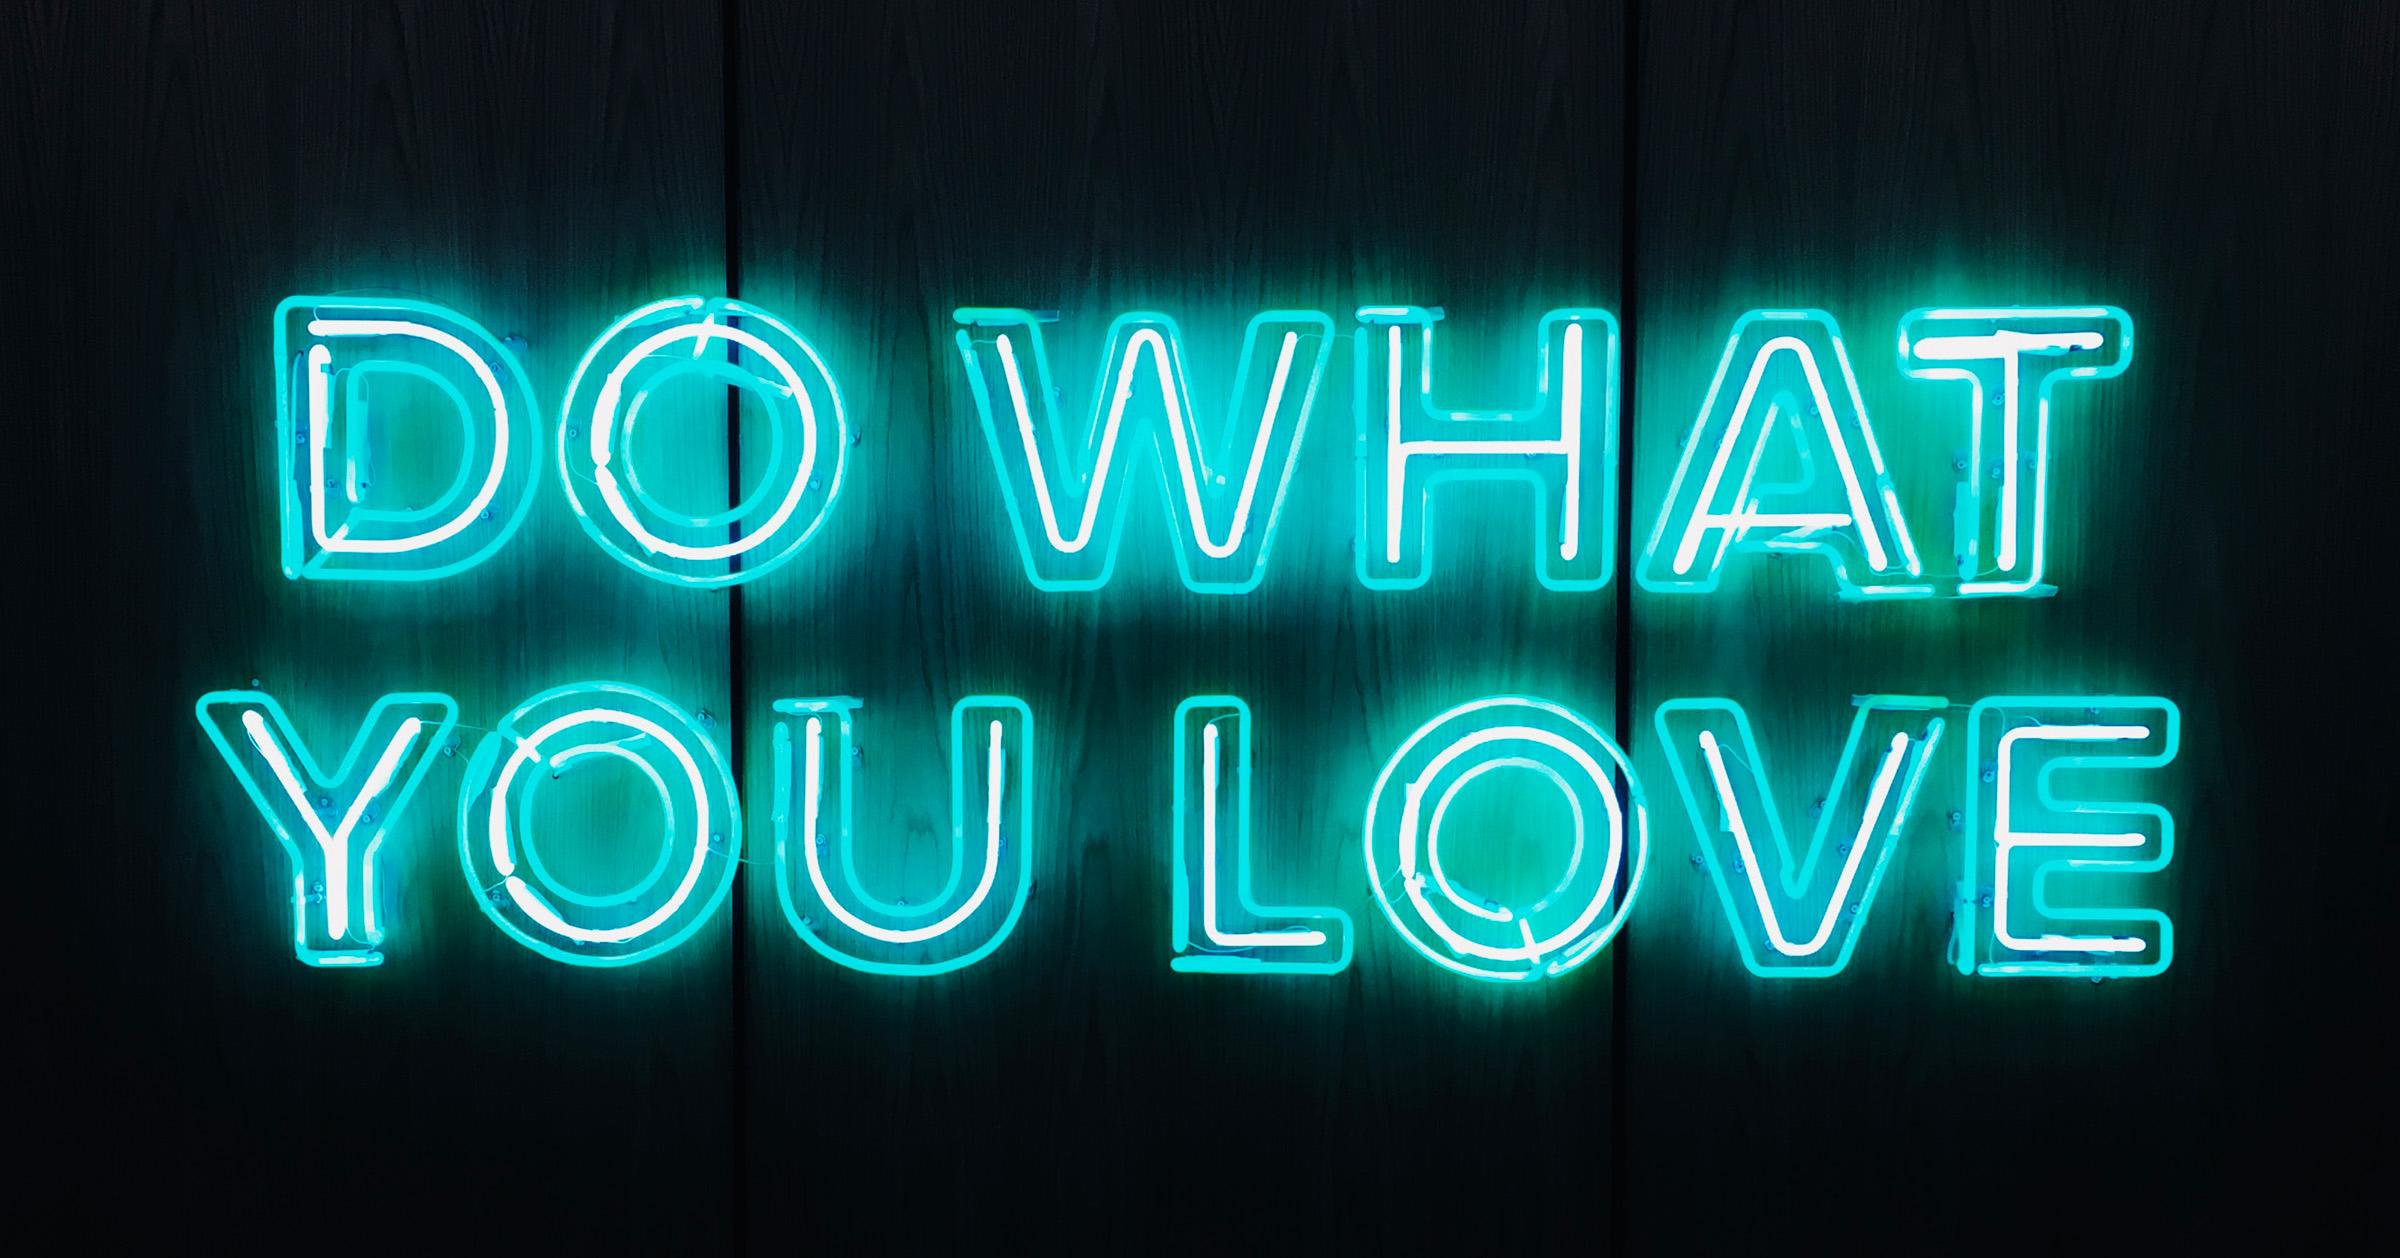 neon lights that spell out "do what you love"